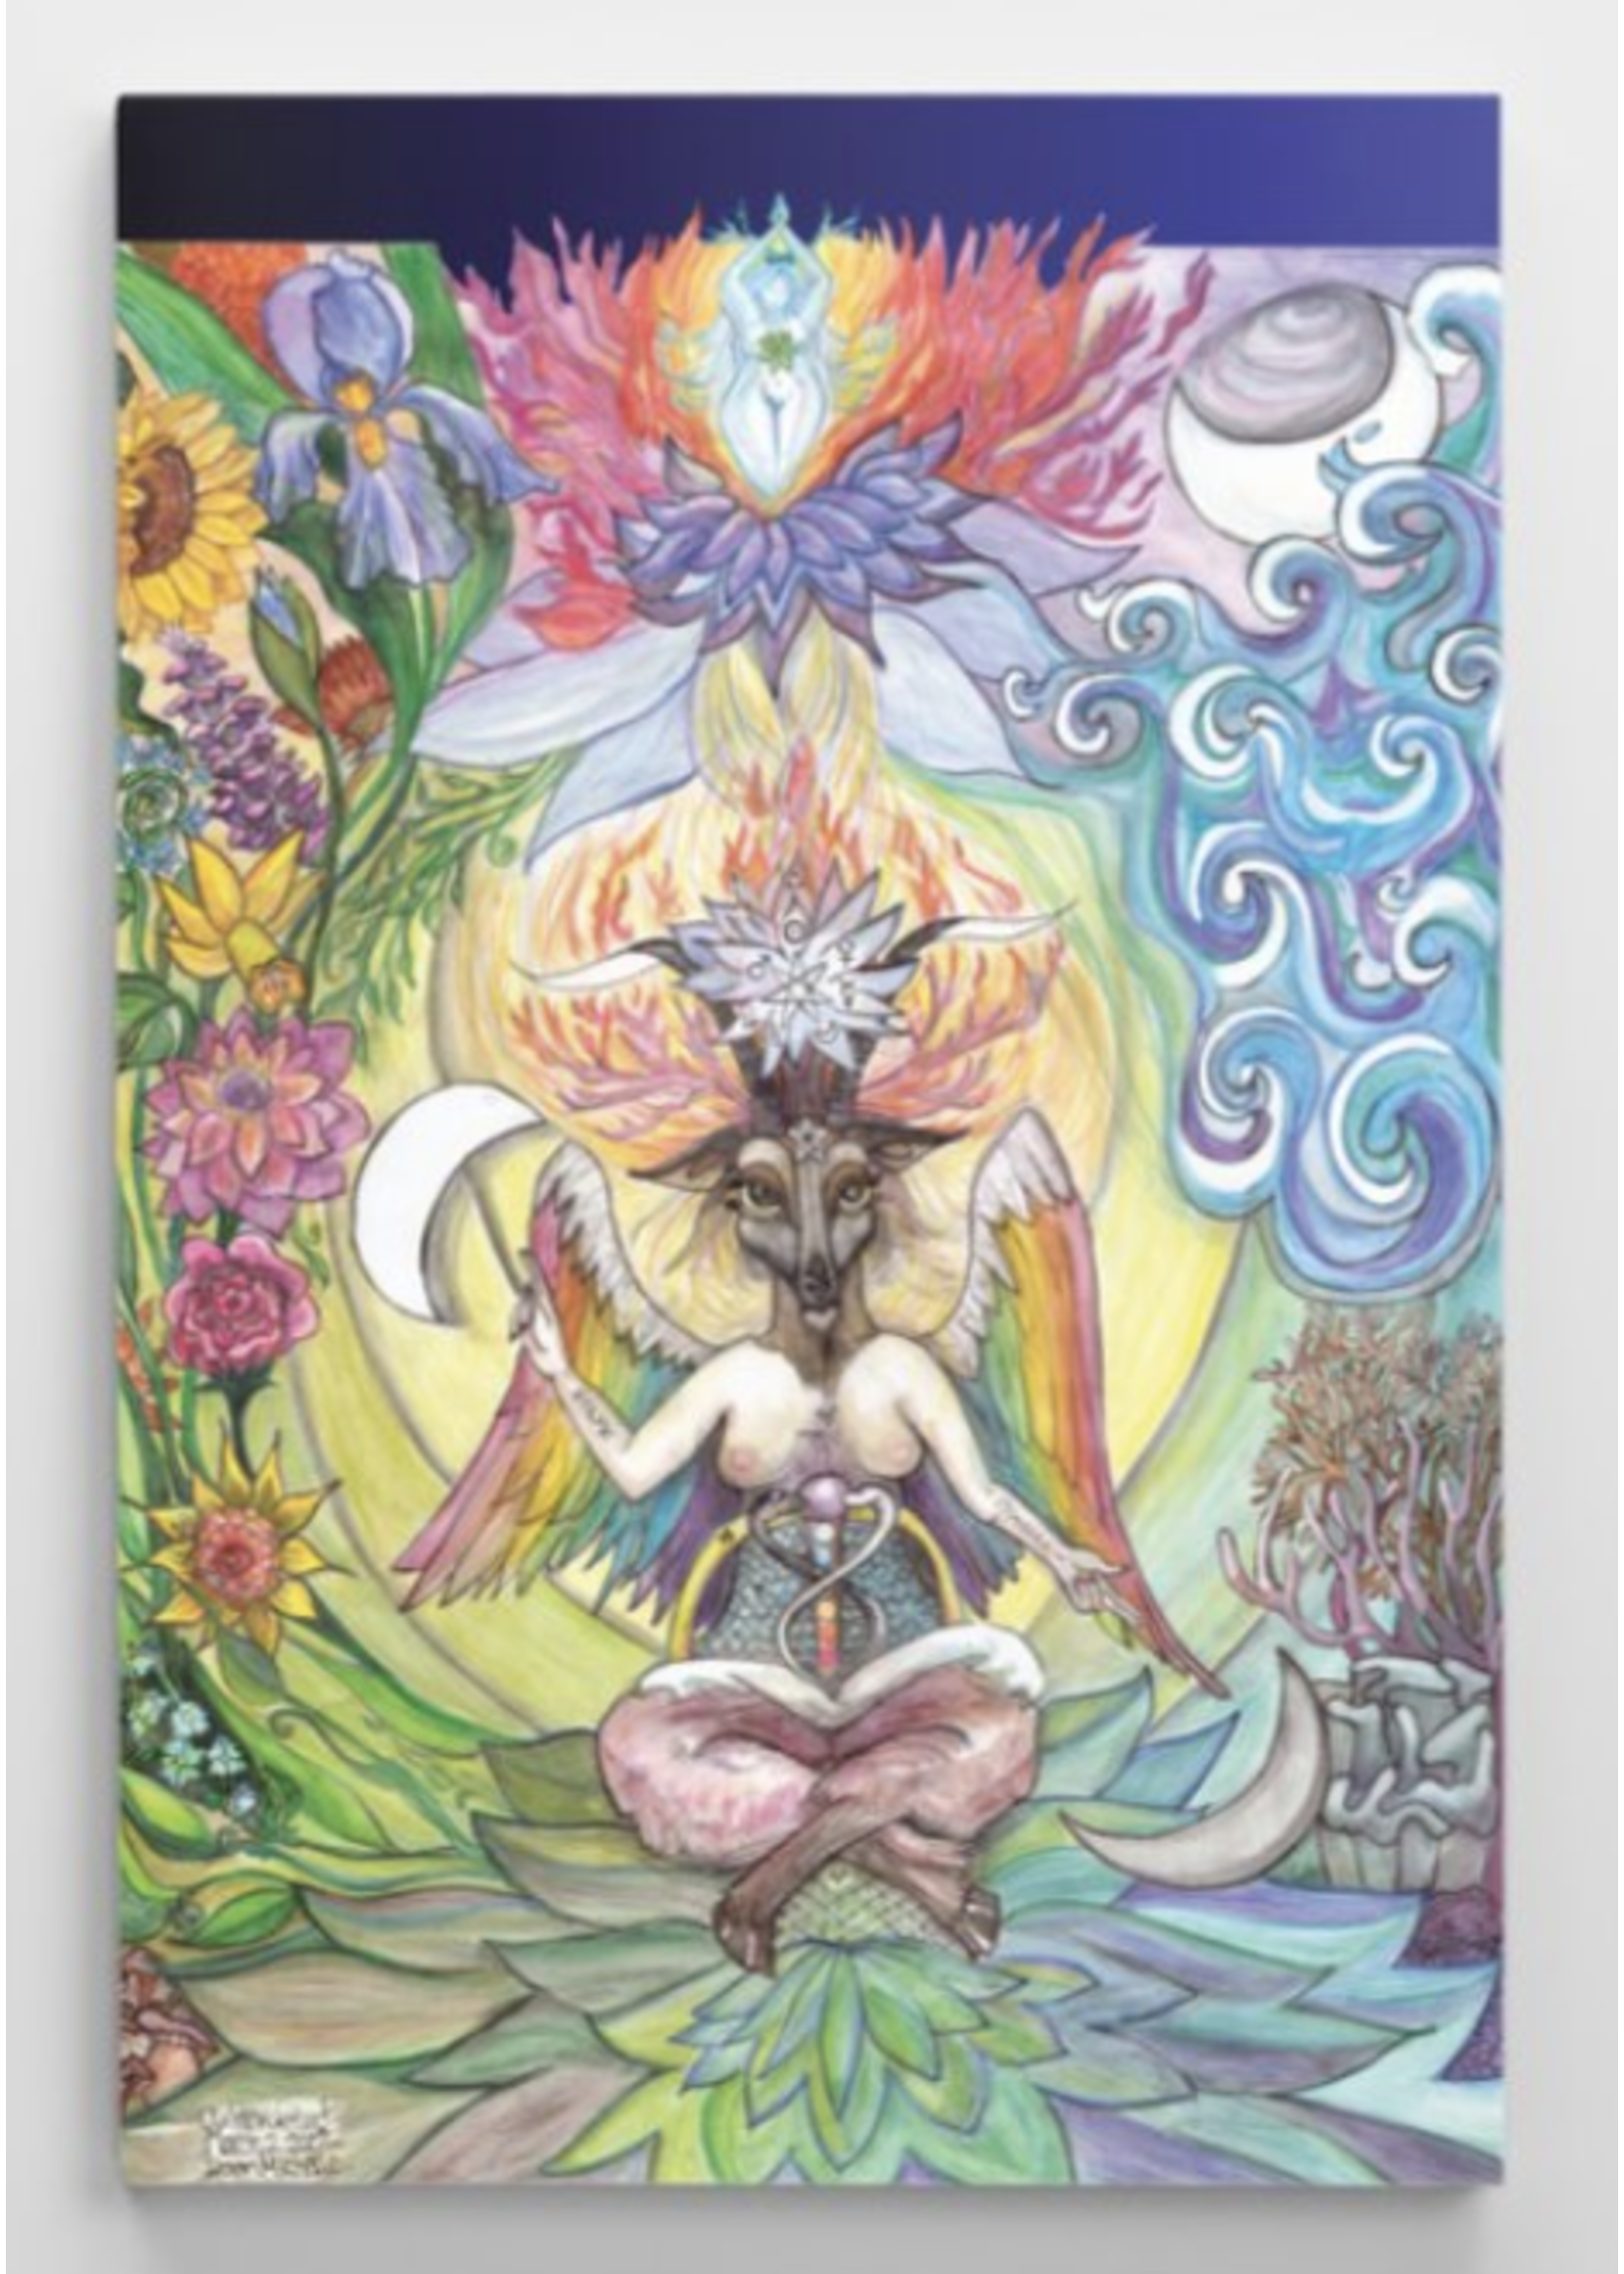 Desire's Attainment Baphomet on Canvas by Heron Michelle, 36" x 24"